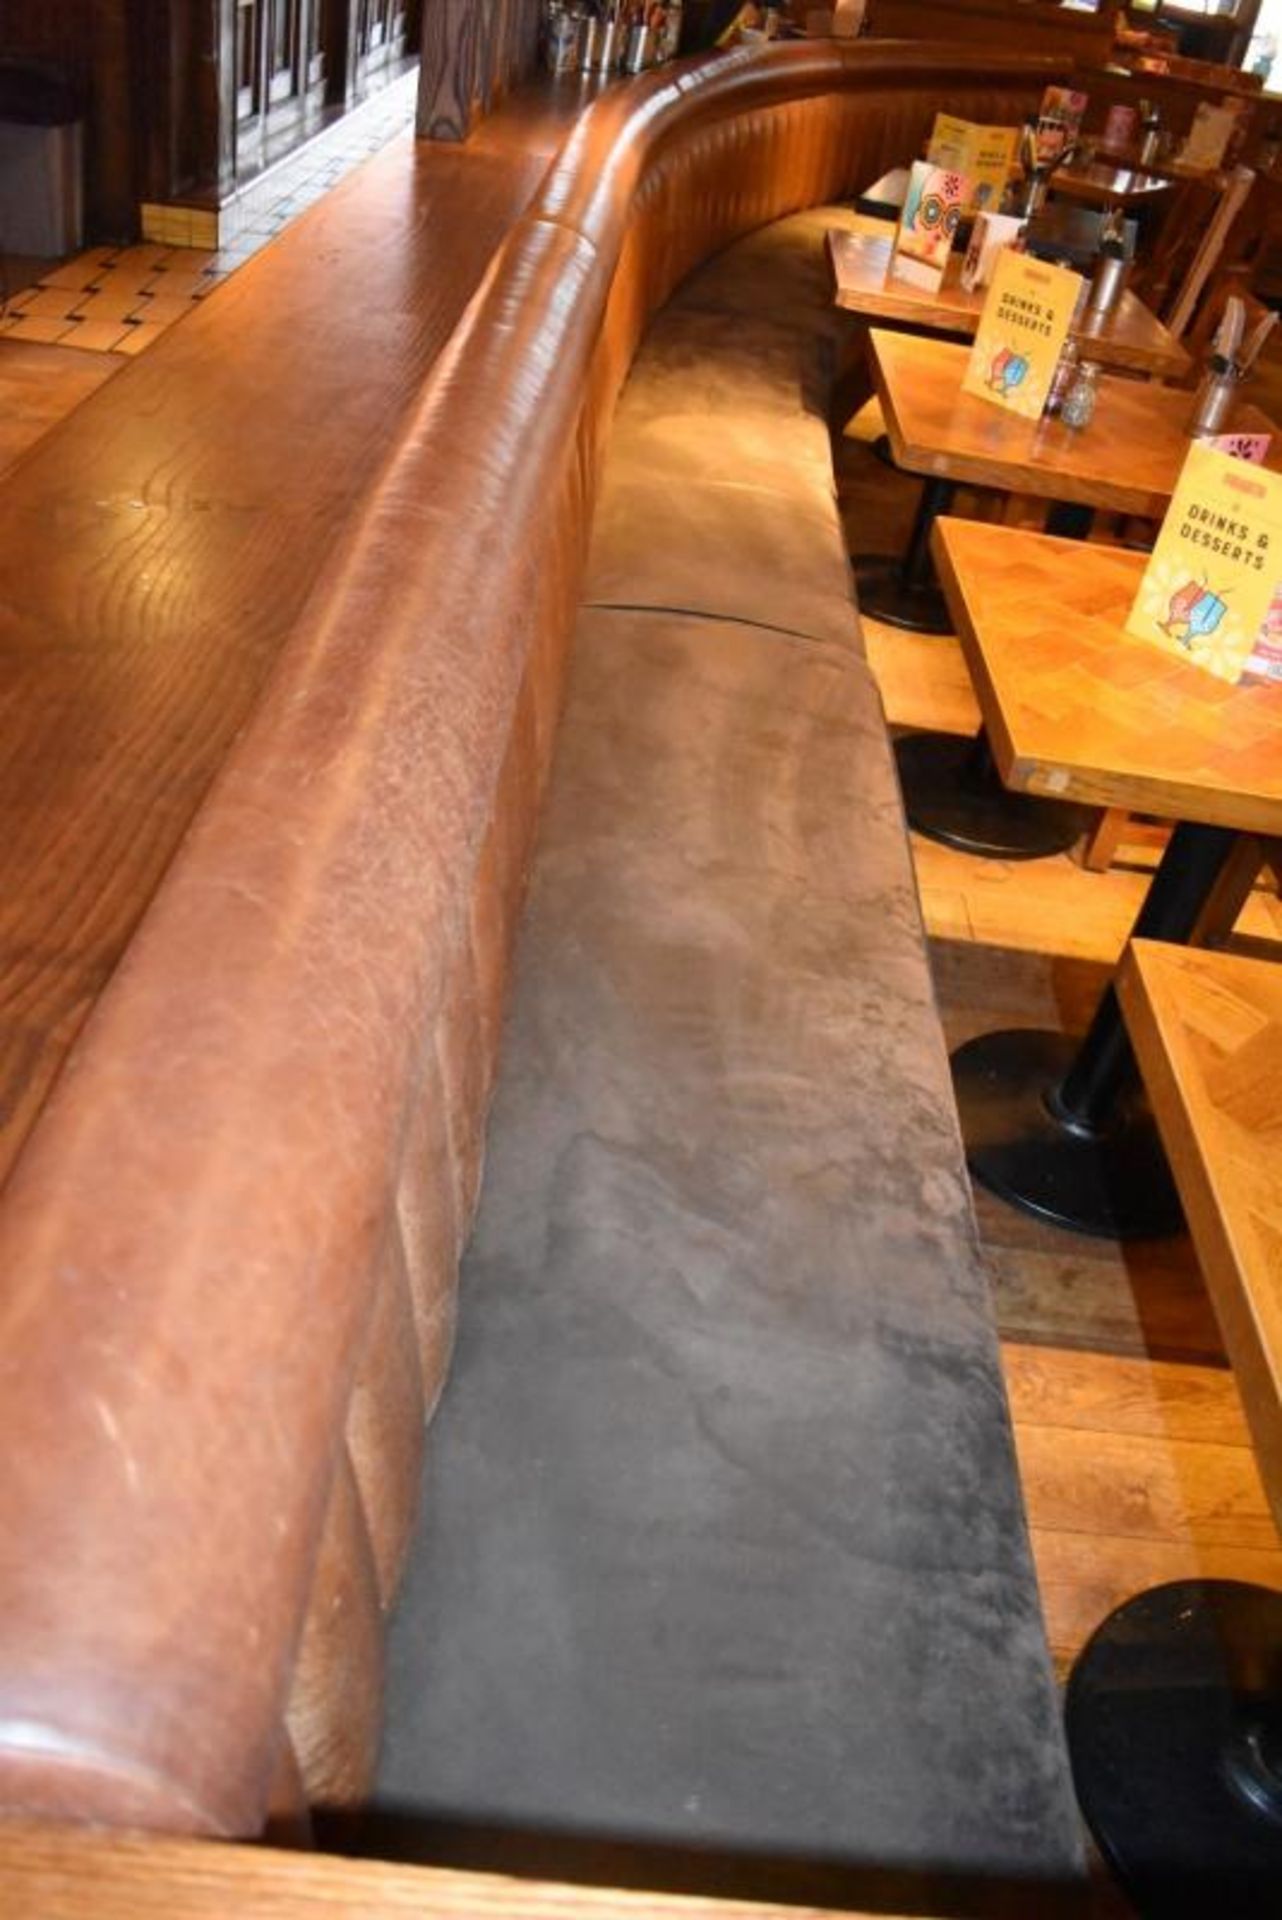 1 x Long Curved Seating Bench From Mexican Themed Restaurant - CL461 - Ref PR891 - Location: London - Image 13 of 14